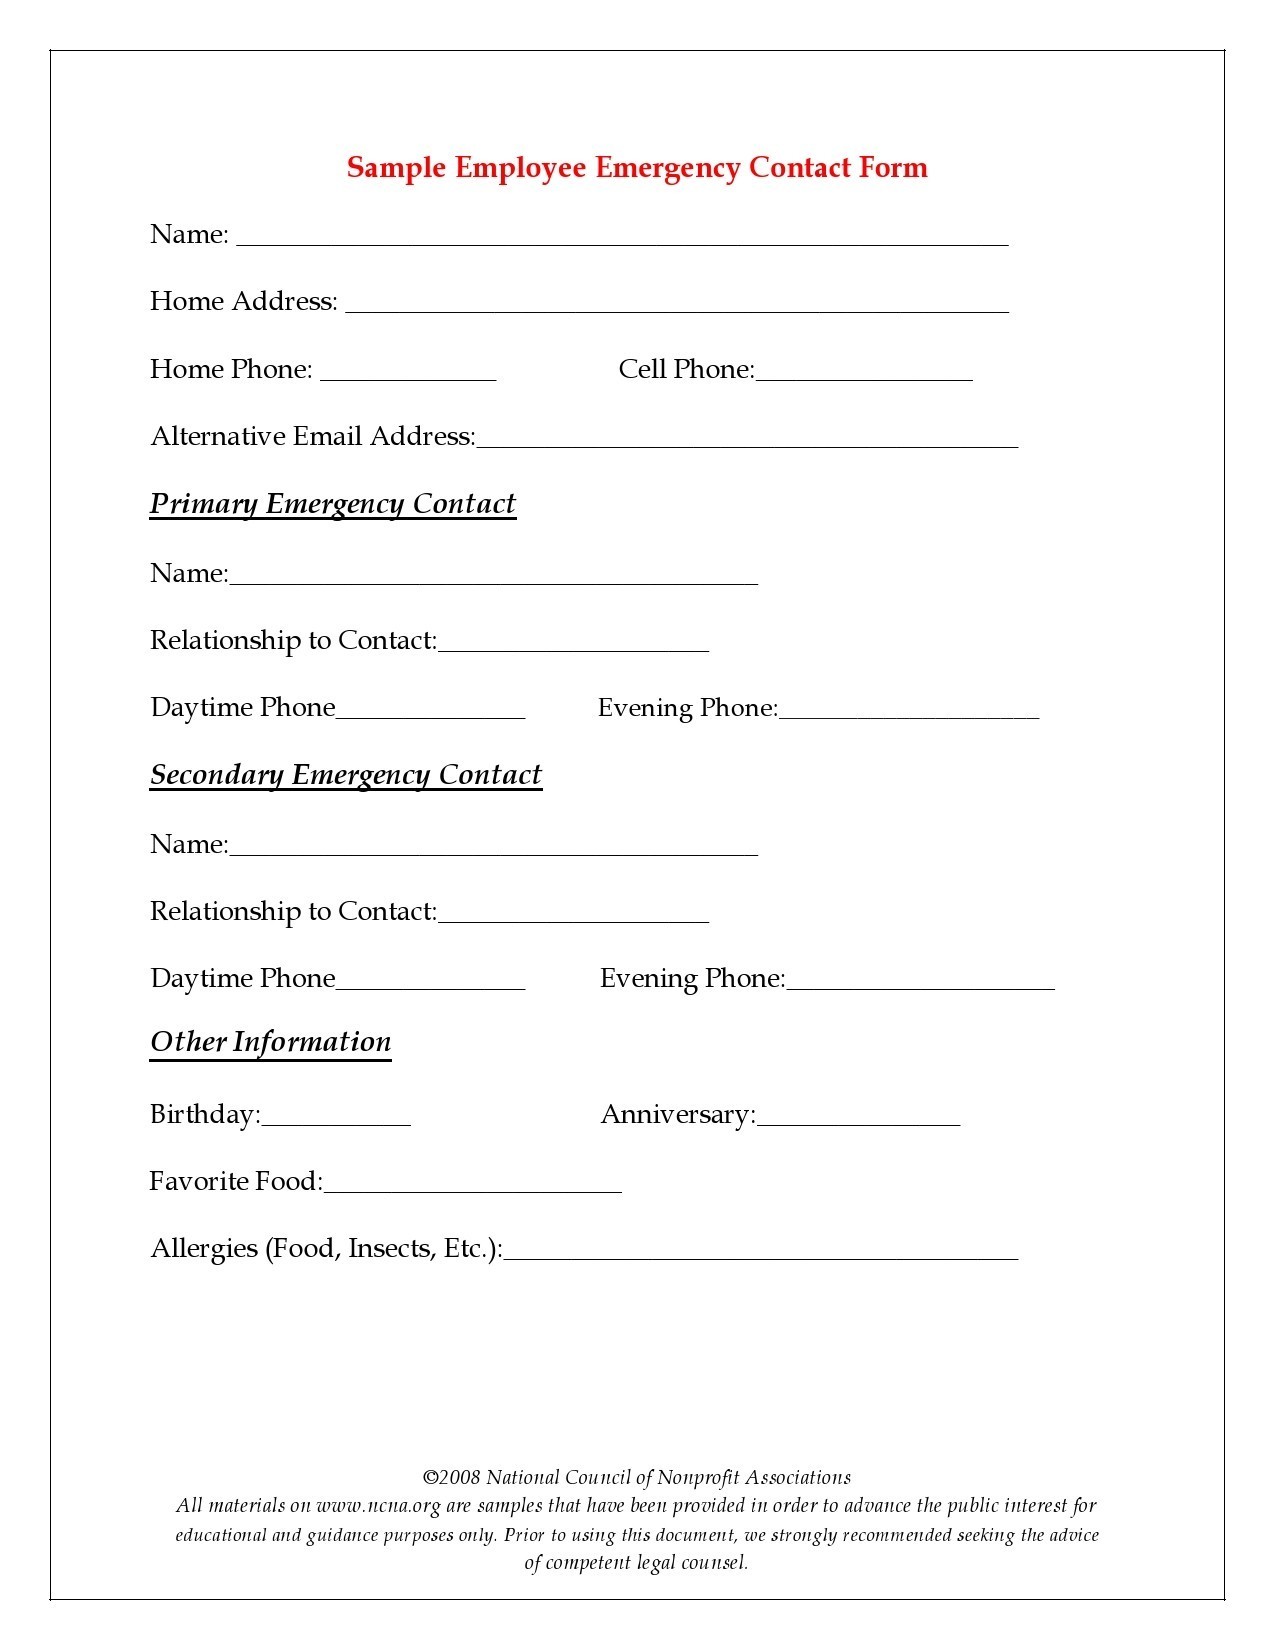 Free Employee Emergency Contact Form Pdf Word Eforms Free Employee Emergency Contact Form Pdf 